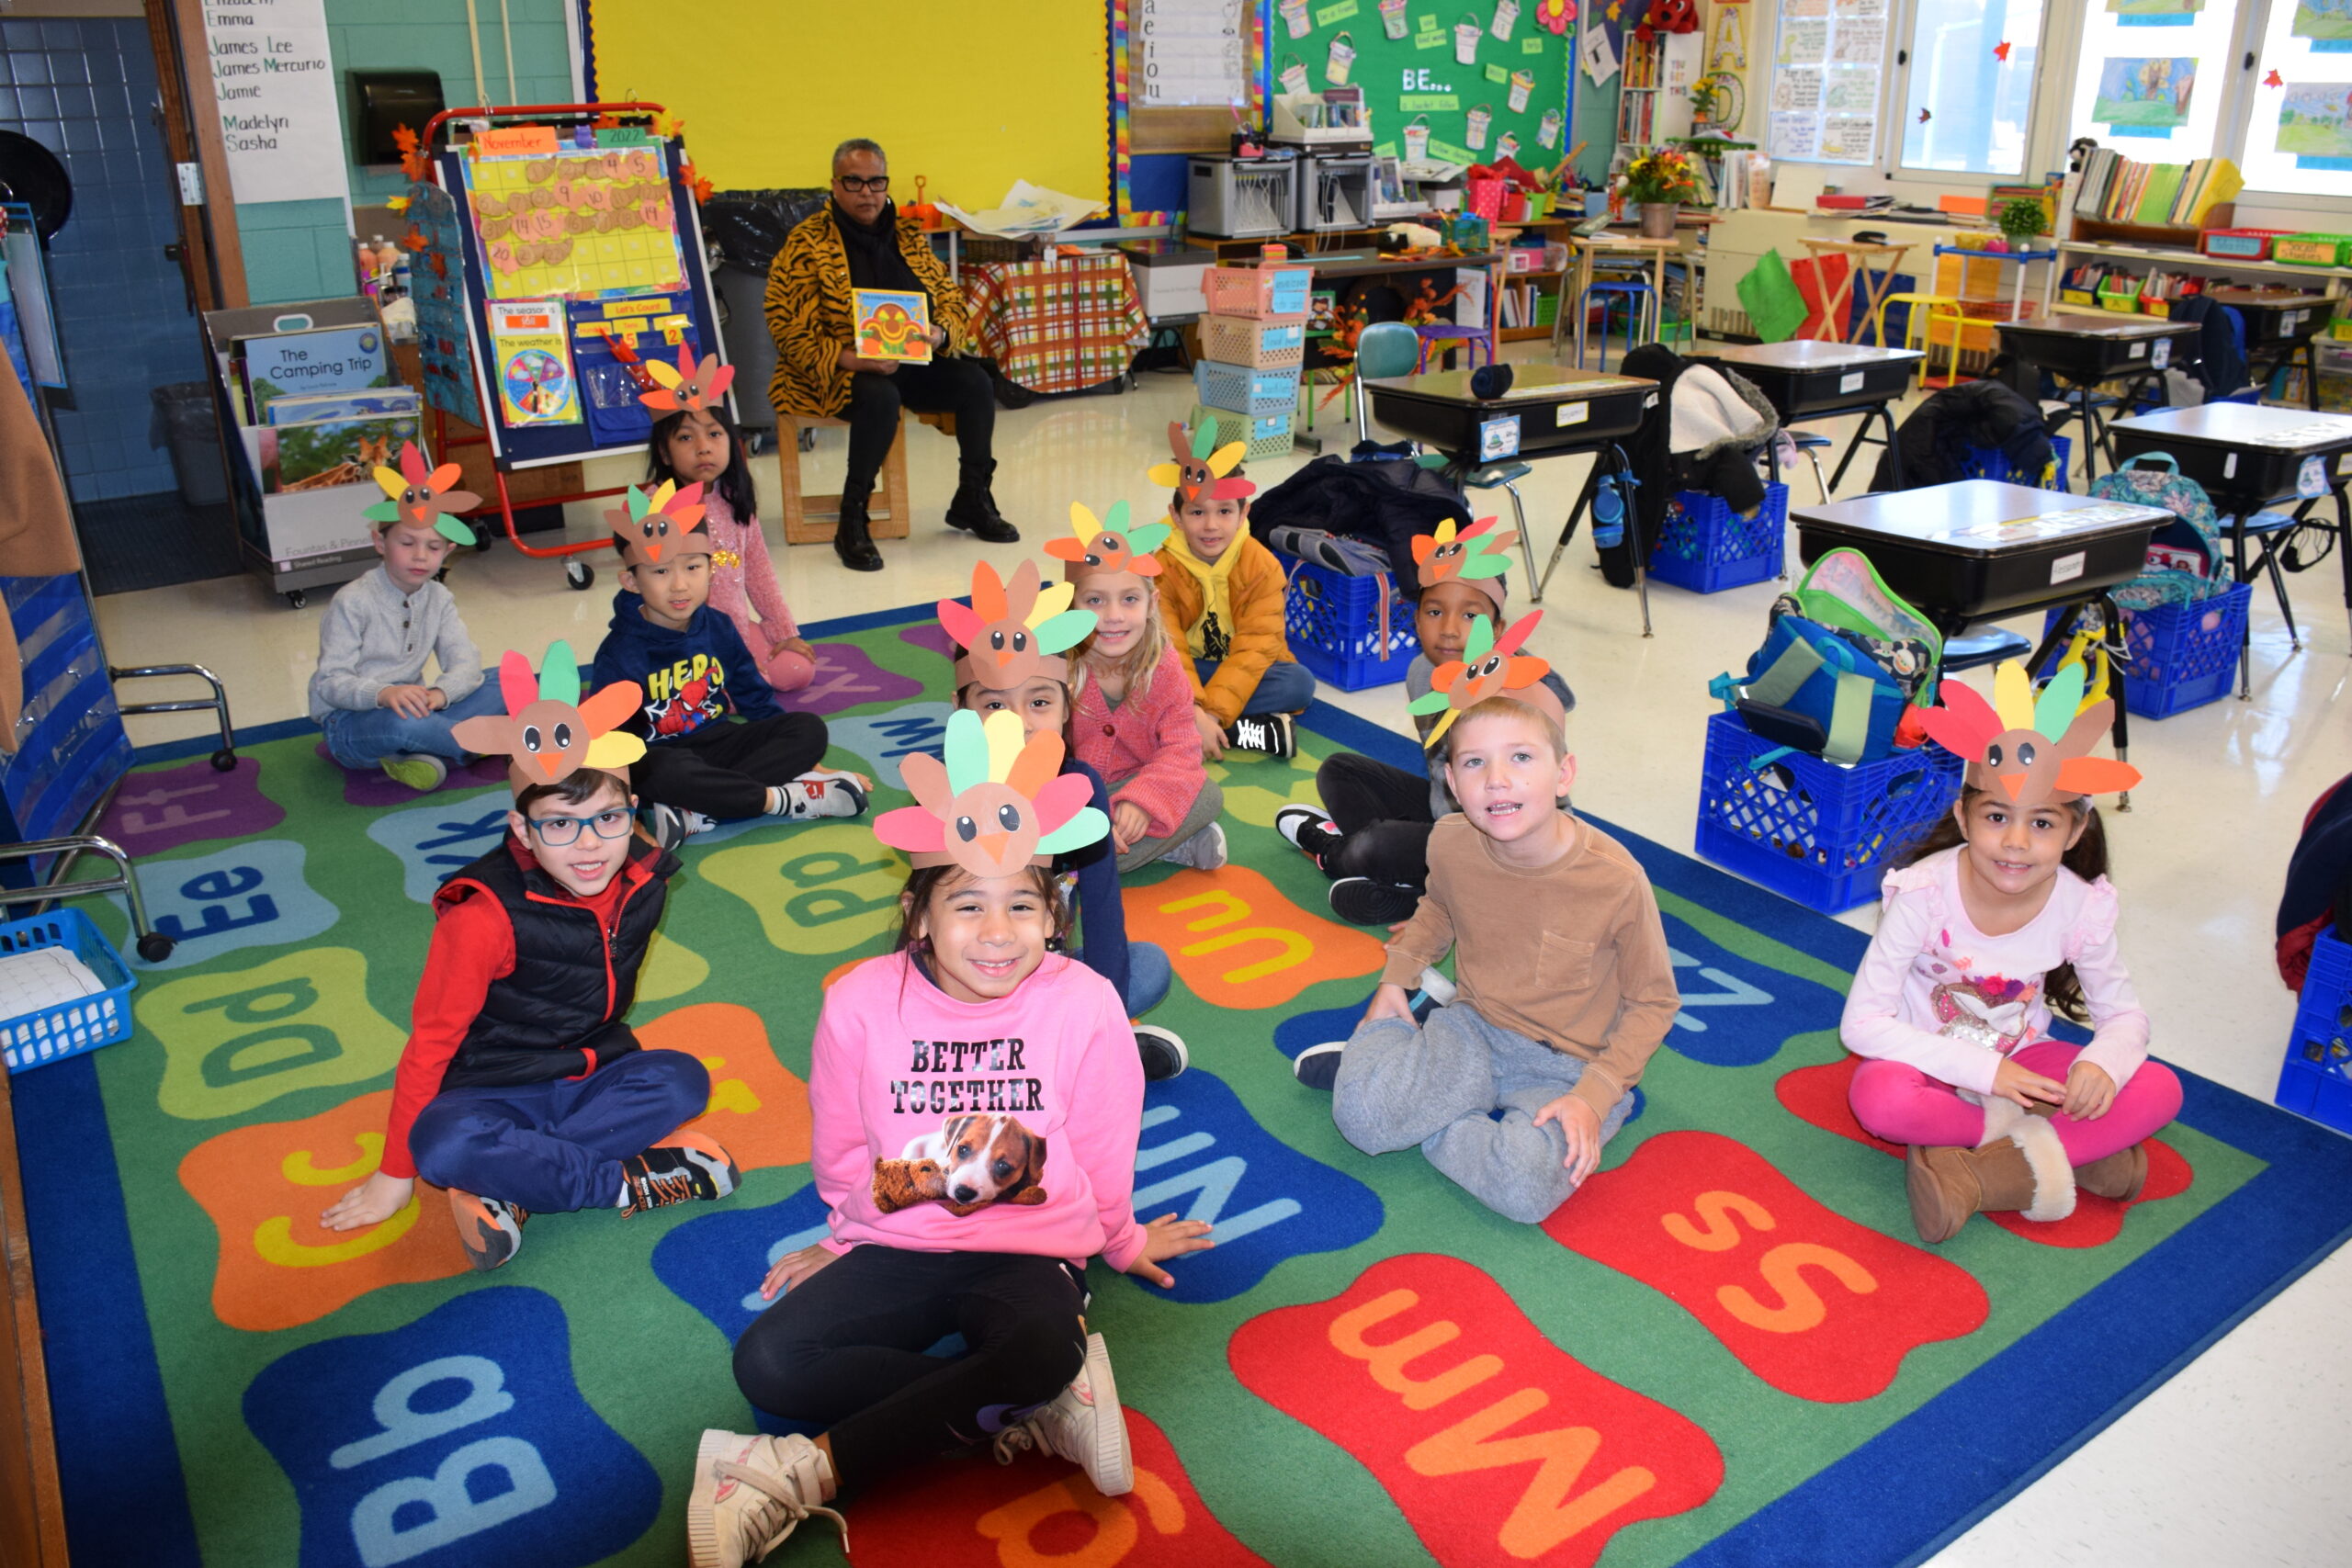 Westhampton Beach Elementary School students celebrated Thanksgiving on November 22 by taking part in feasts that included treats and learning about the first Thanksgiving. COURTESY WESTHAMPTON BEACH SCHOOL DISTRICT